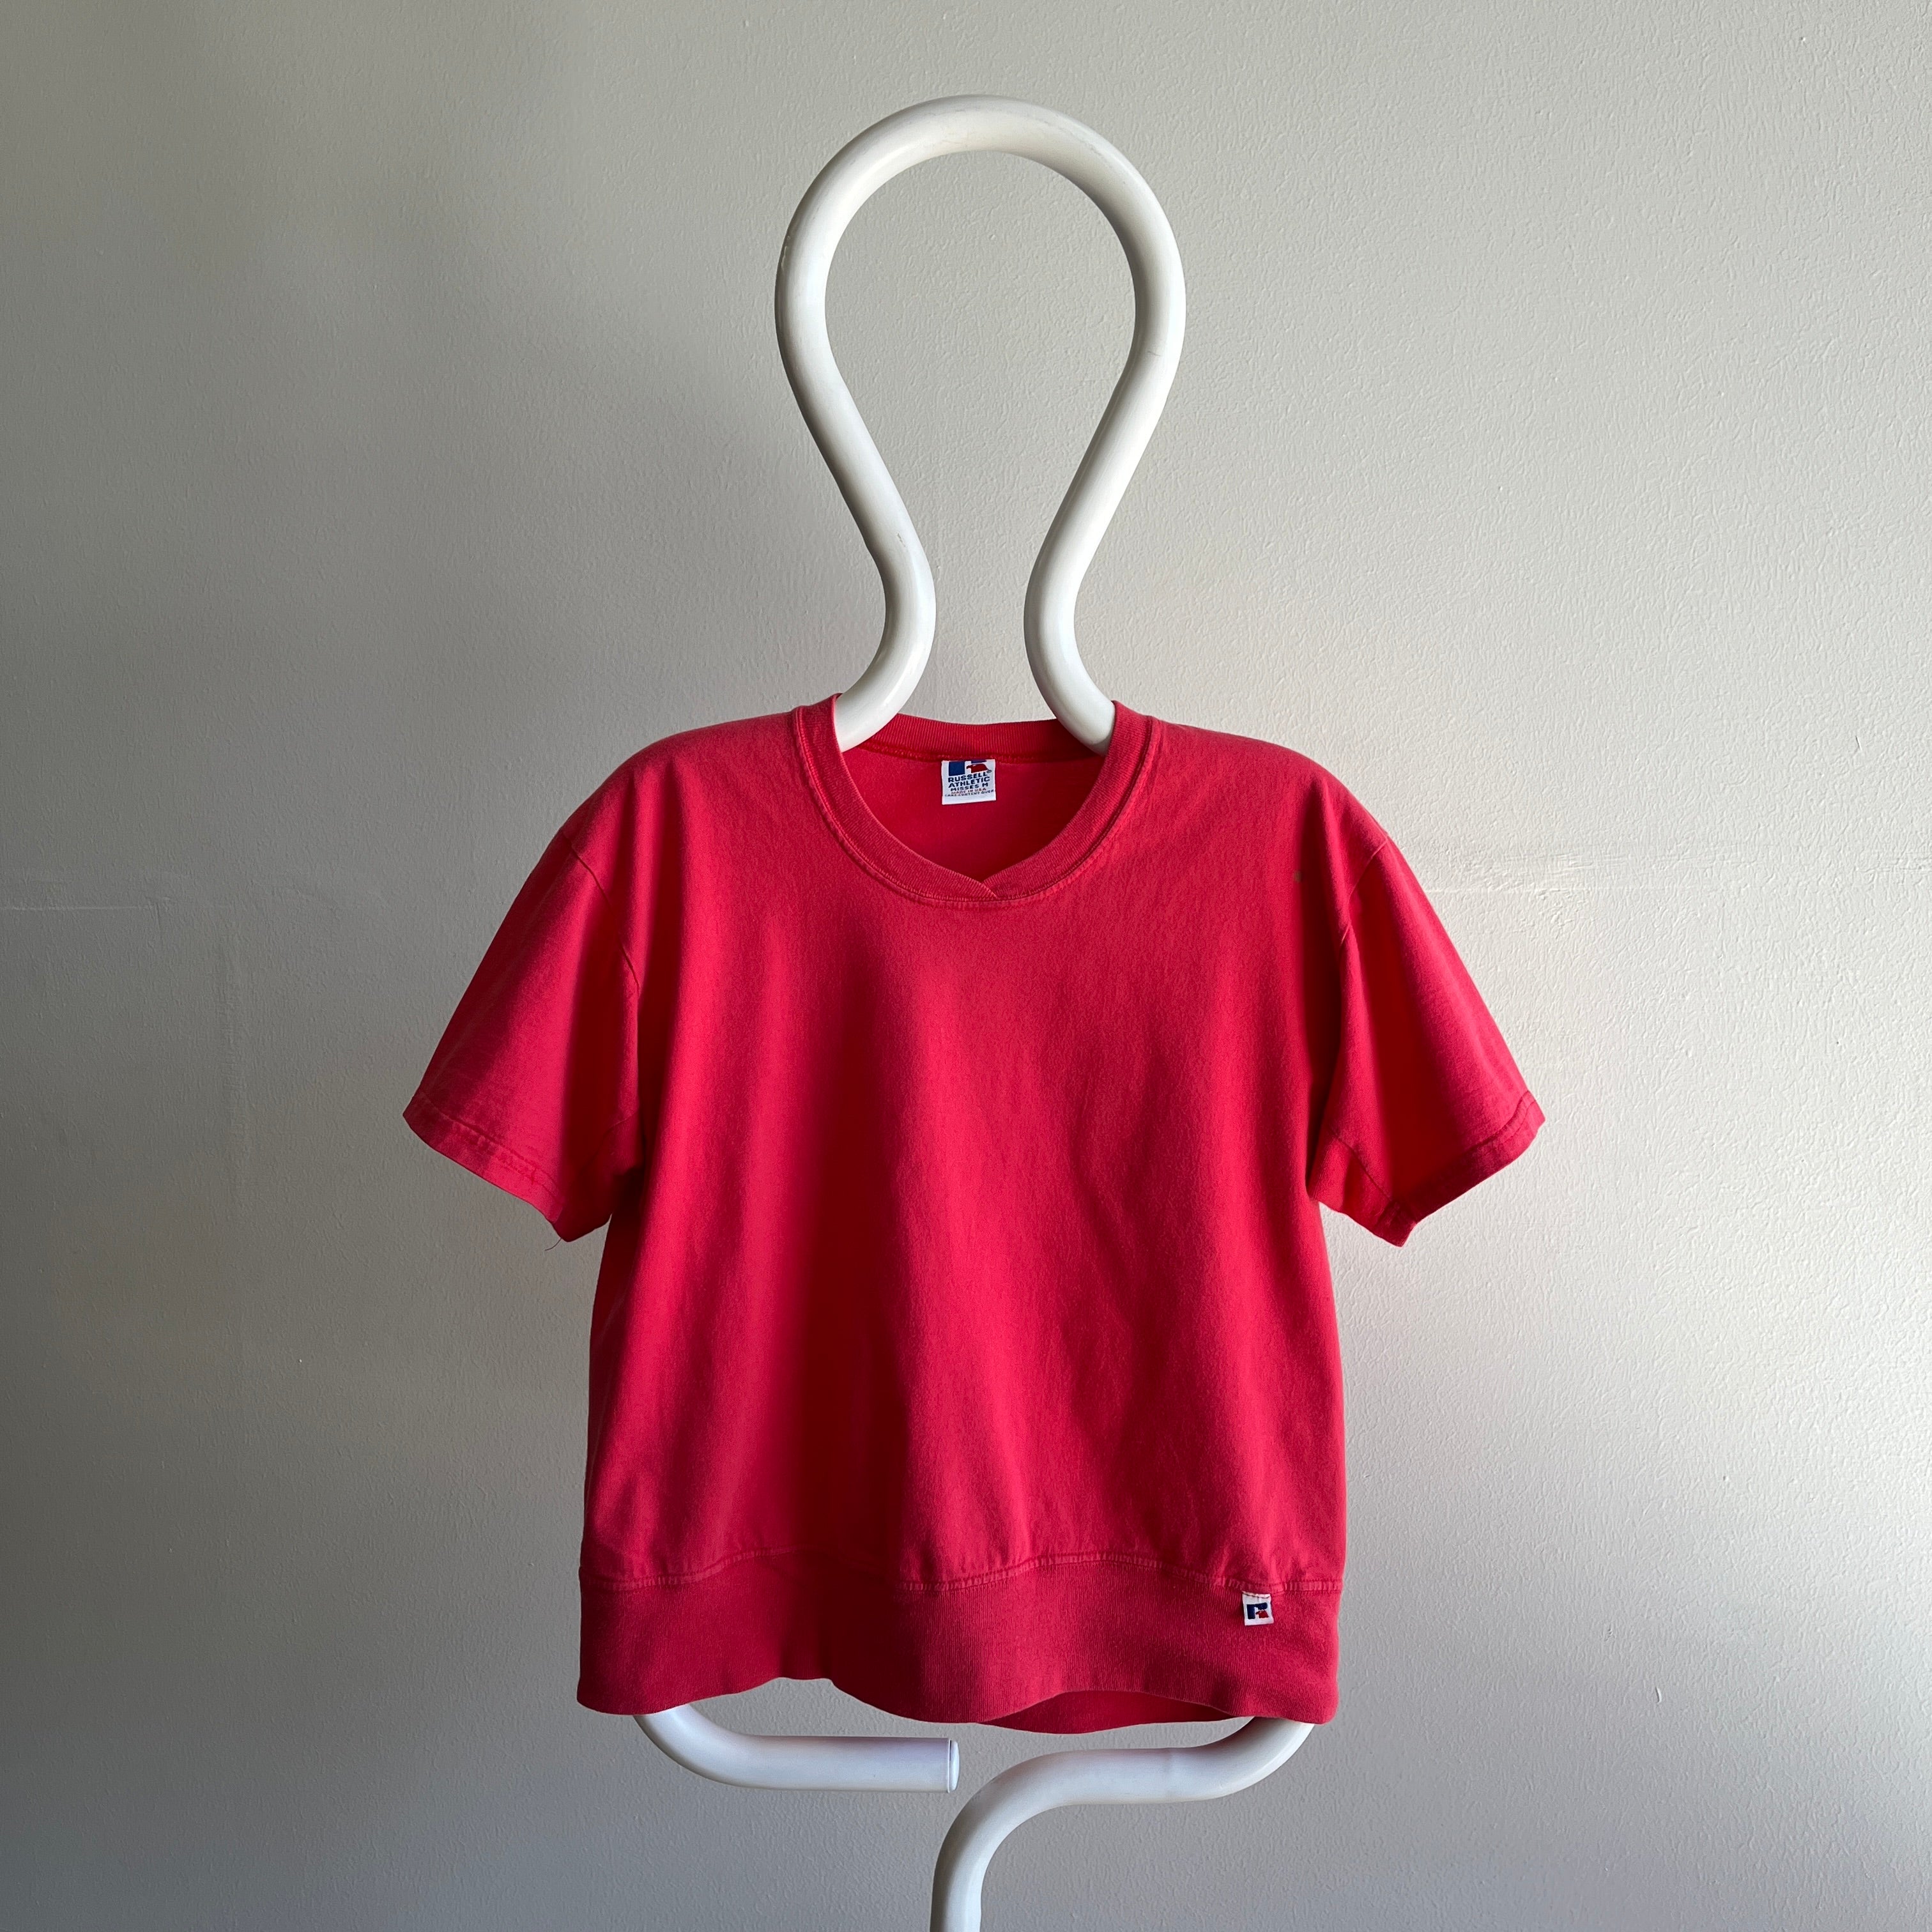 1980s AWESOME Russell Brand T-Shirt/Warm Up Cut - Red/Pink